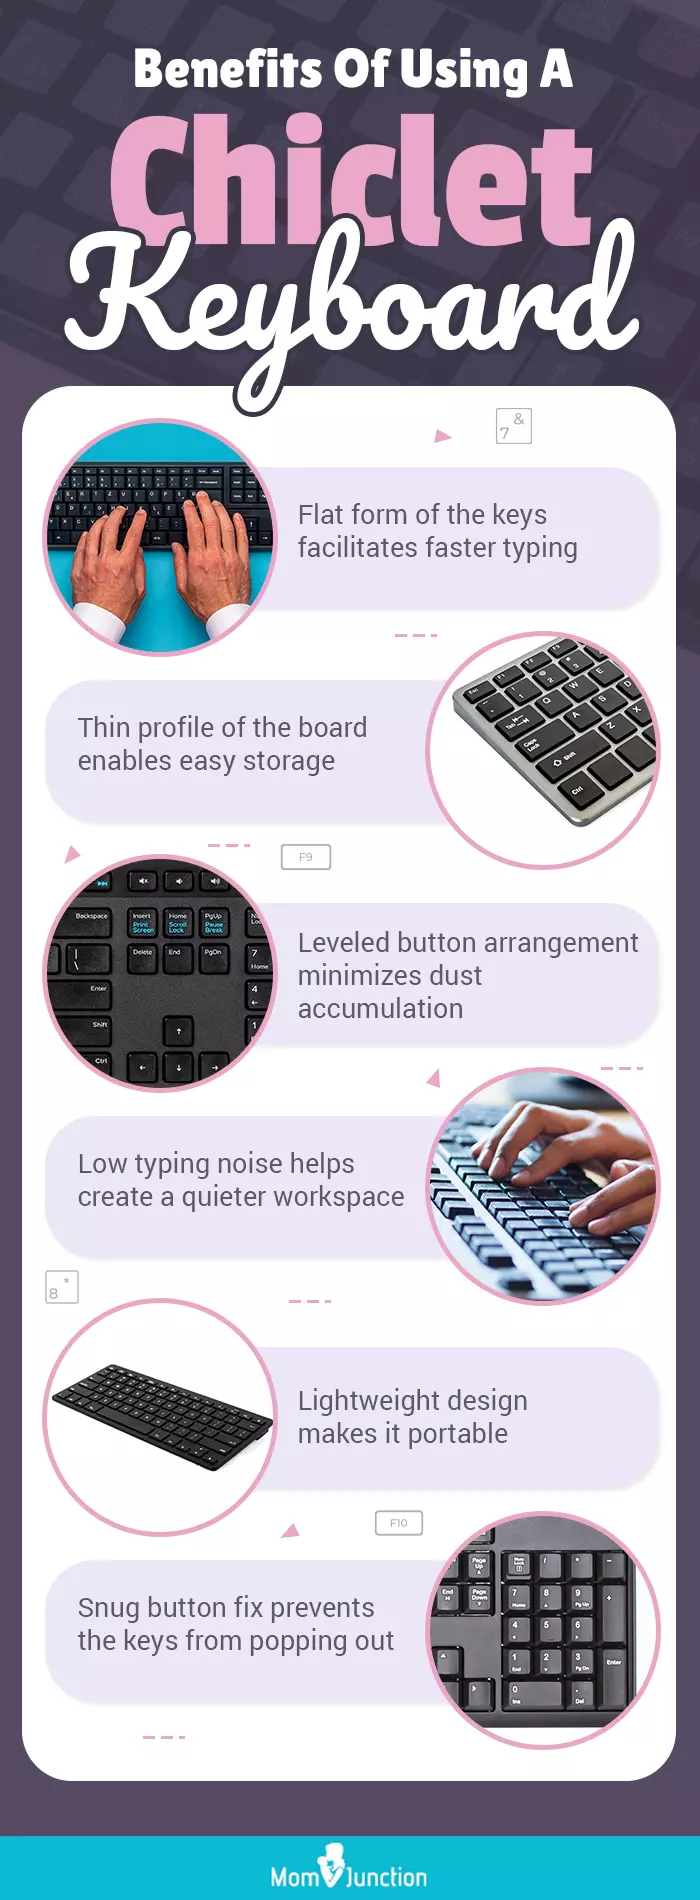 Benefits-Of-Using-A-Chiclet-Keyboard (infographic)